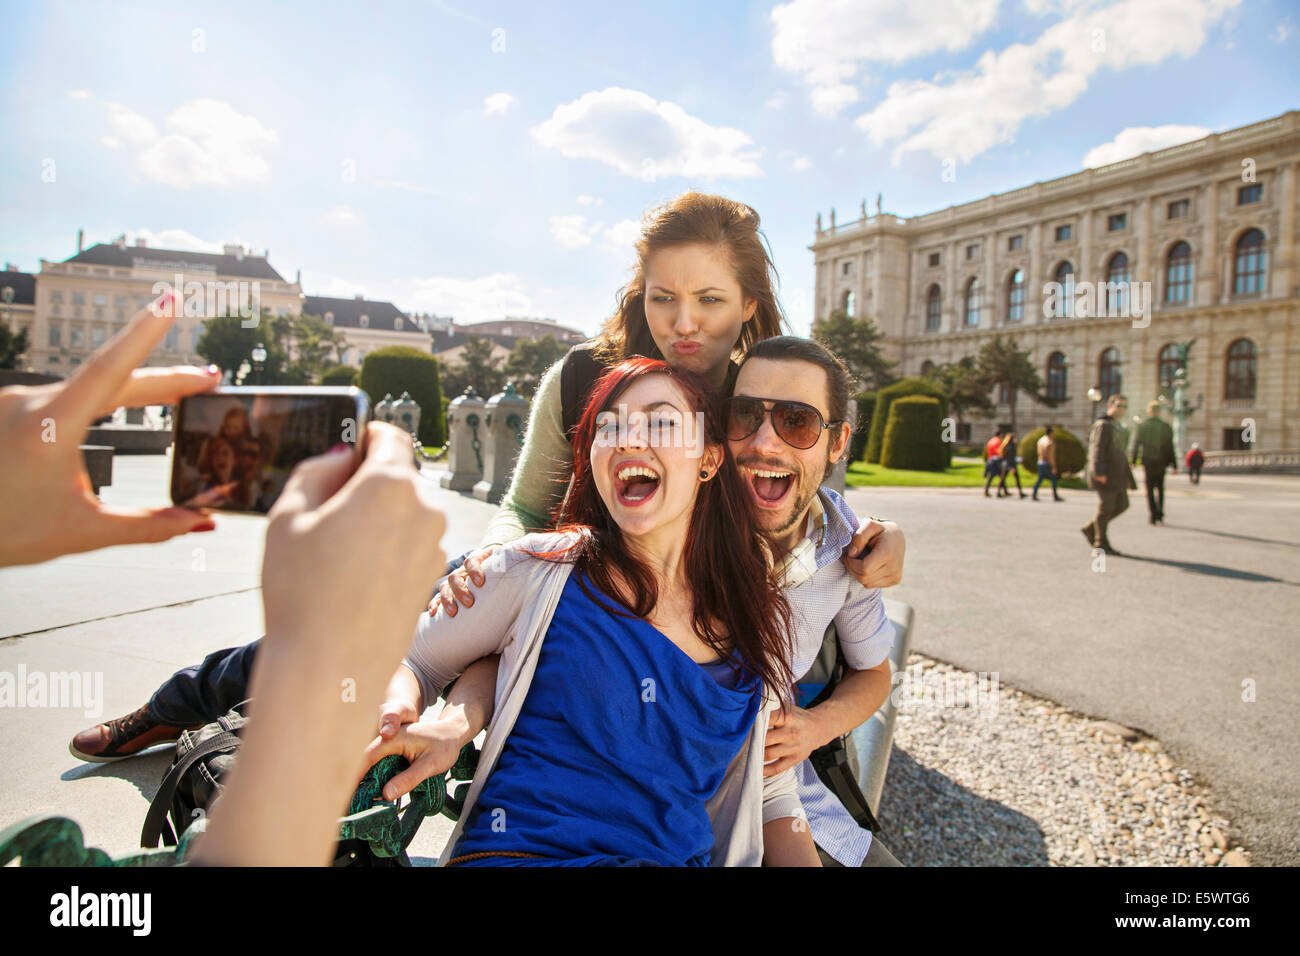 Young adult woman taking picture of friends Stock Photo